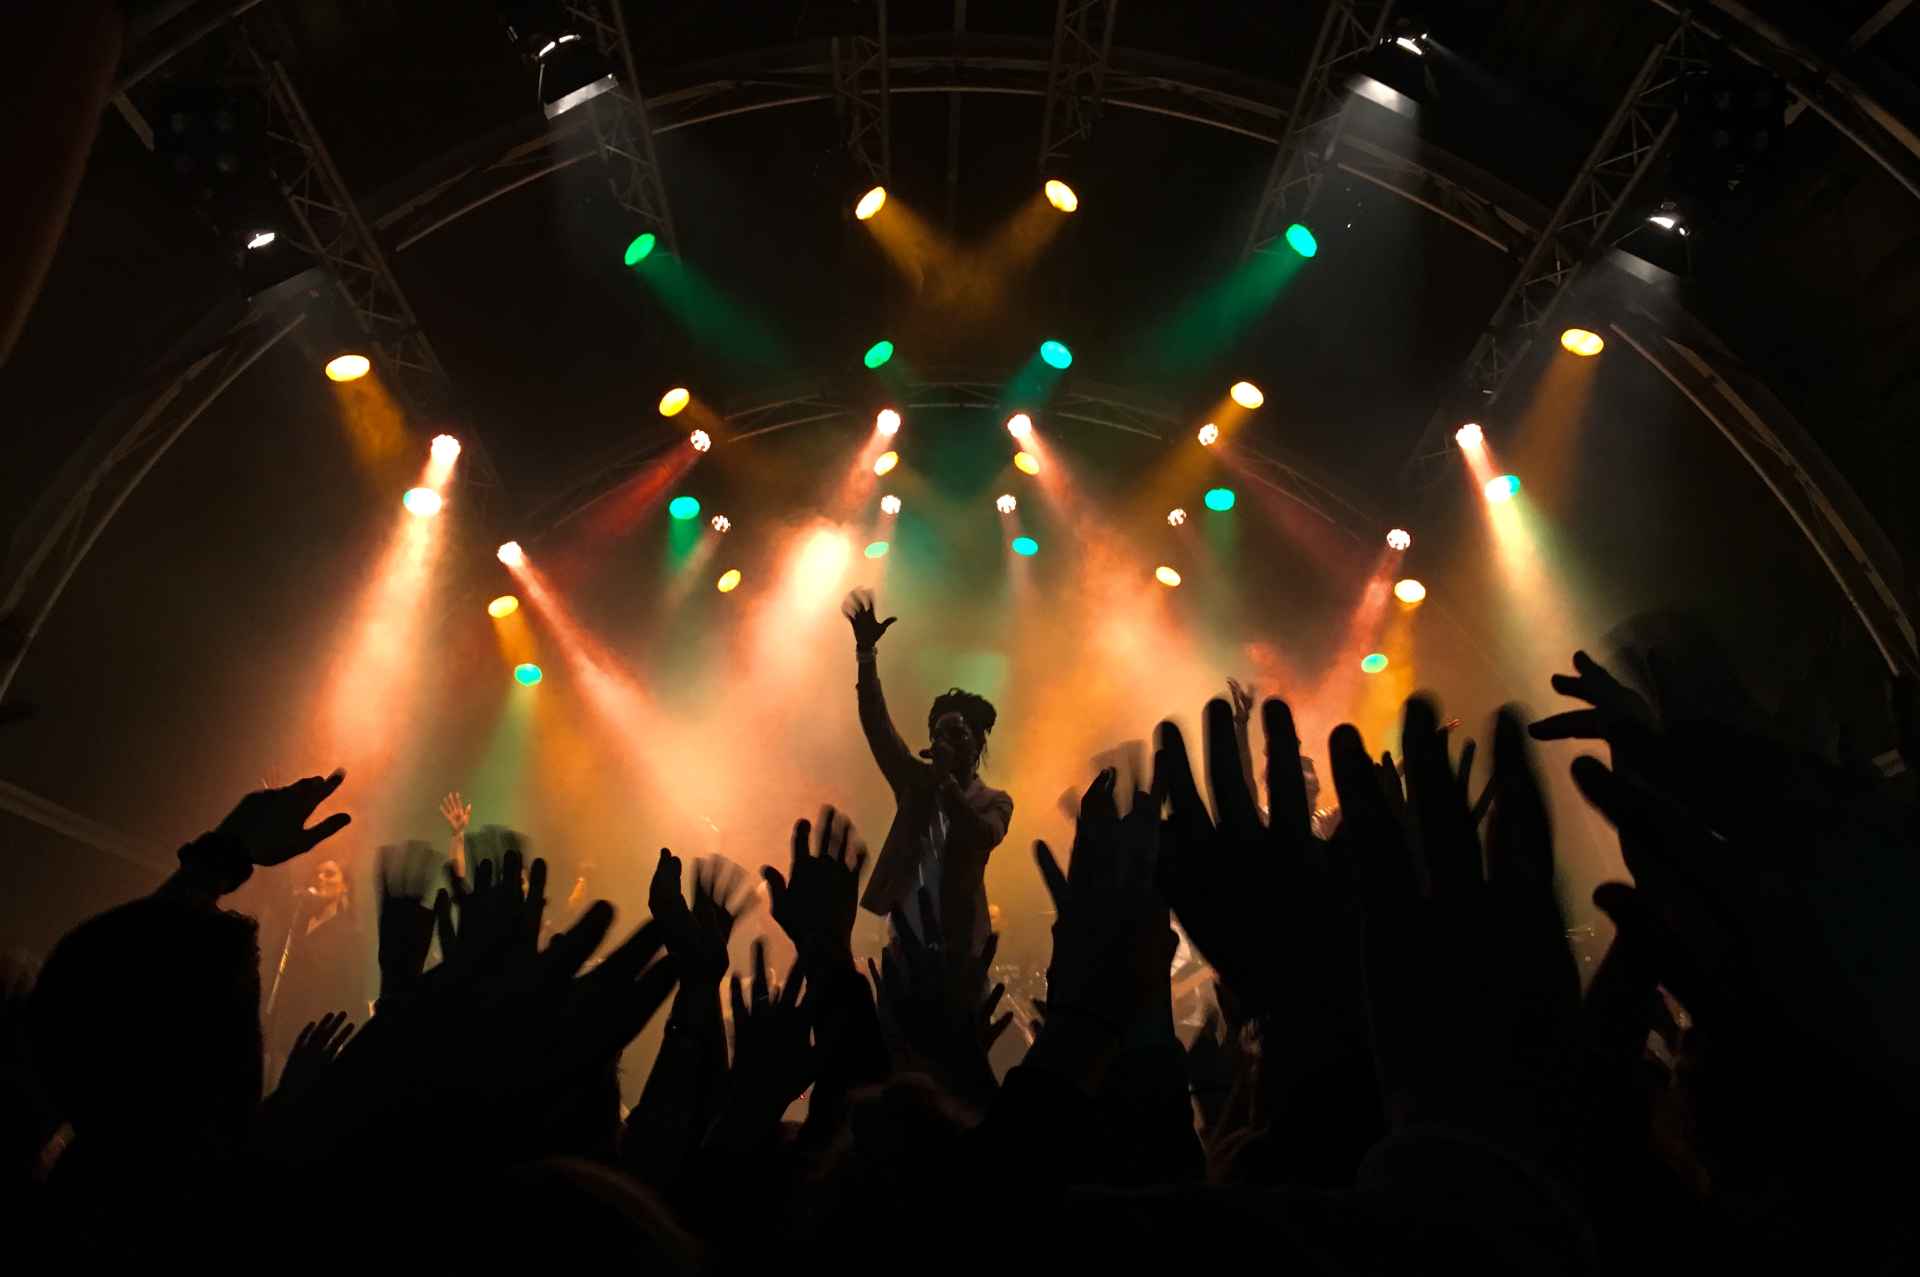 Live concerts, gigs and other music events